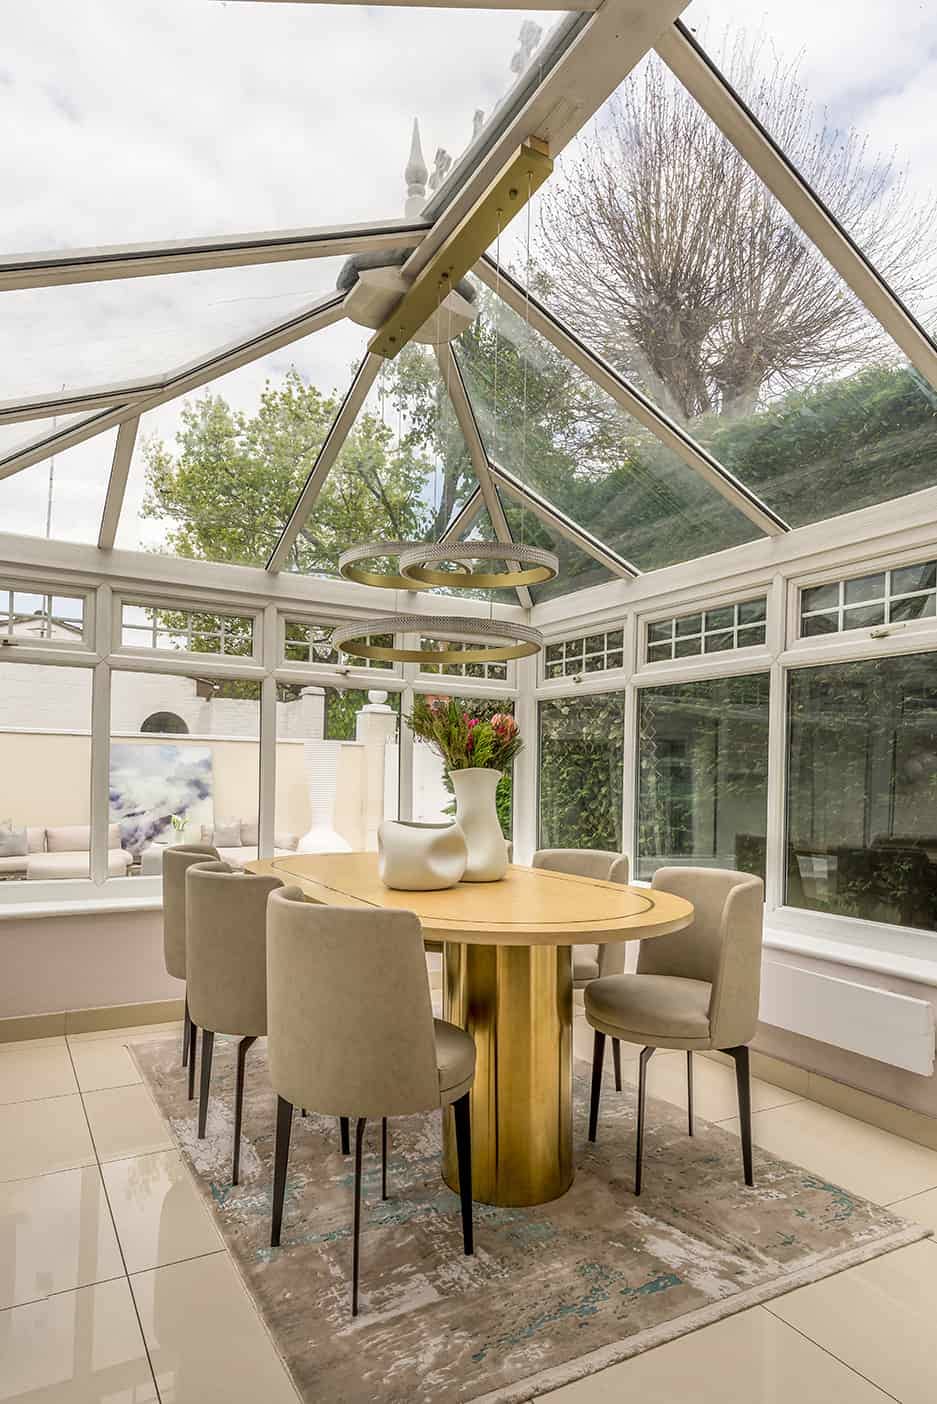 Woodford Interior Design Project for a Garden Conservatory